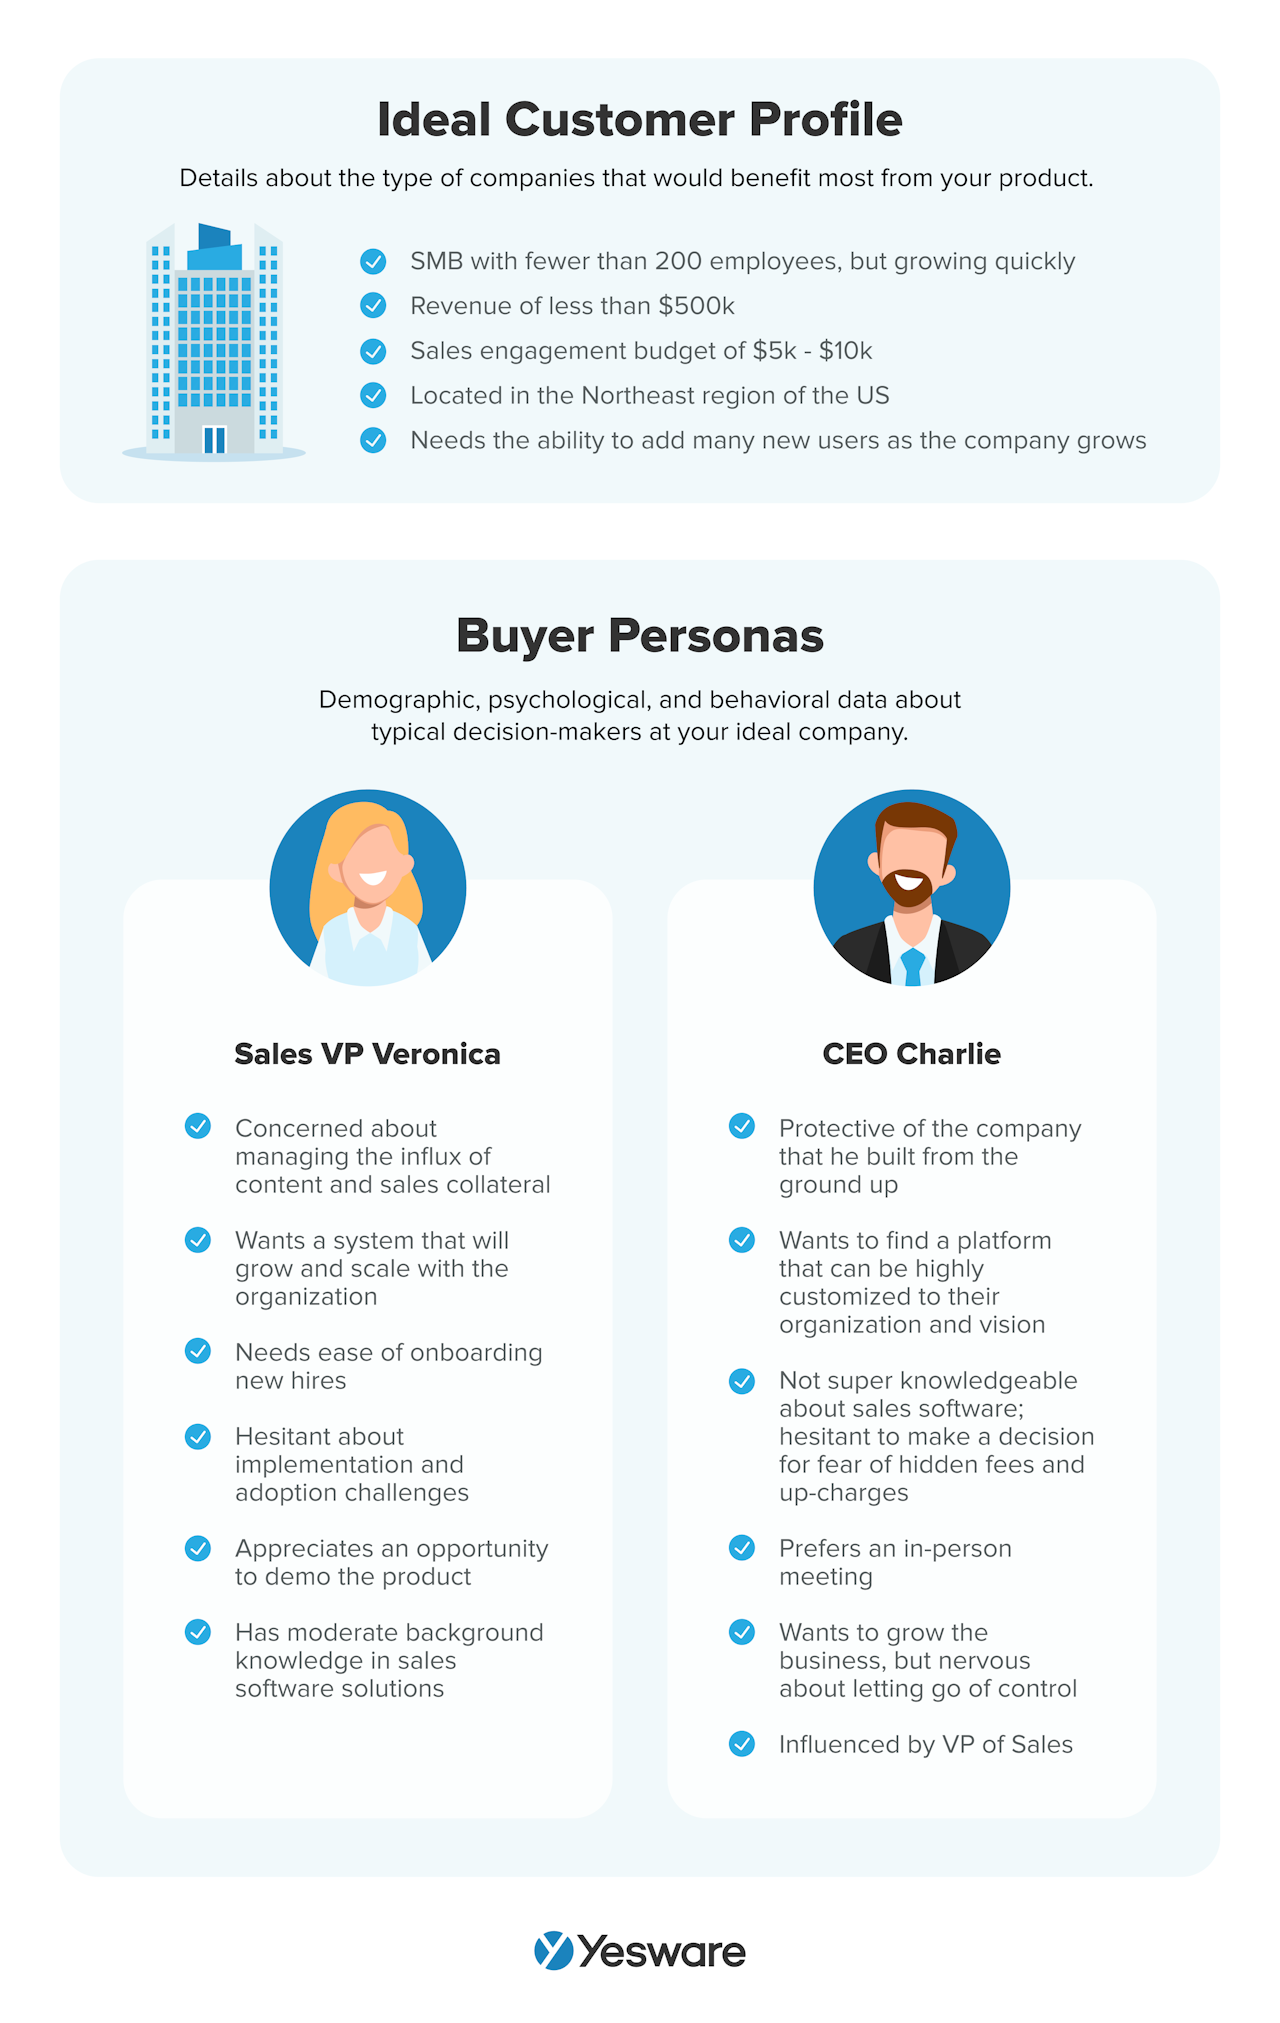 solution selling tips: understand your ICP and buyer personas